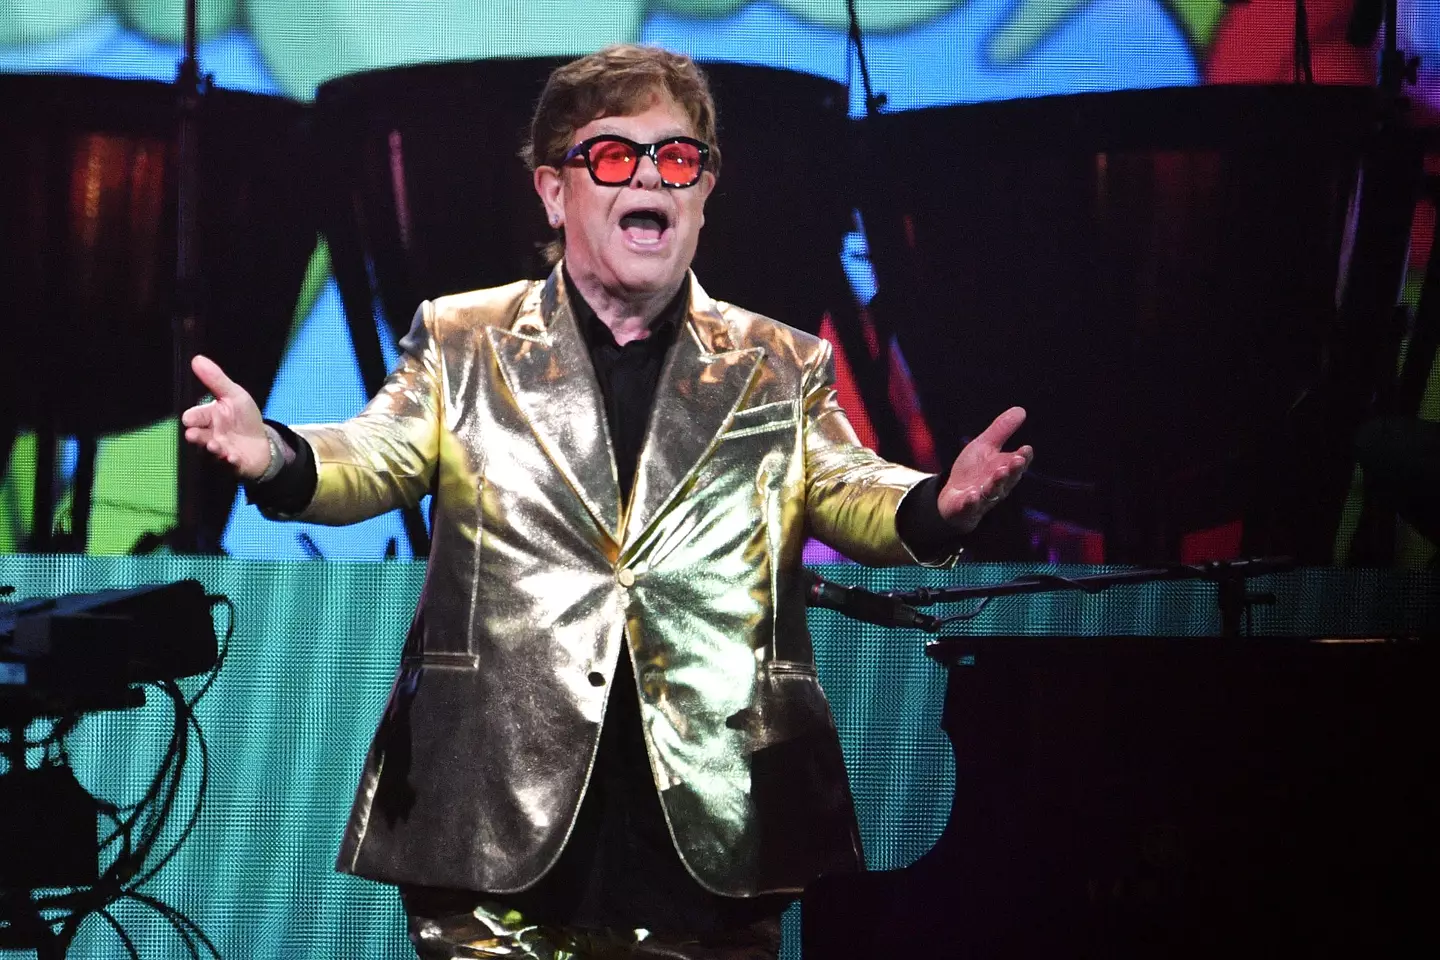 Elton John headlined the iconic event this past summer.